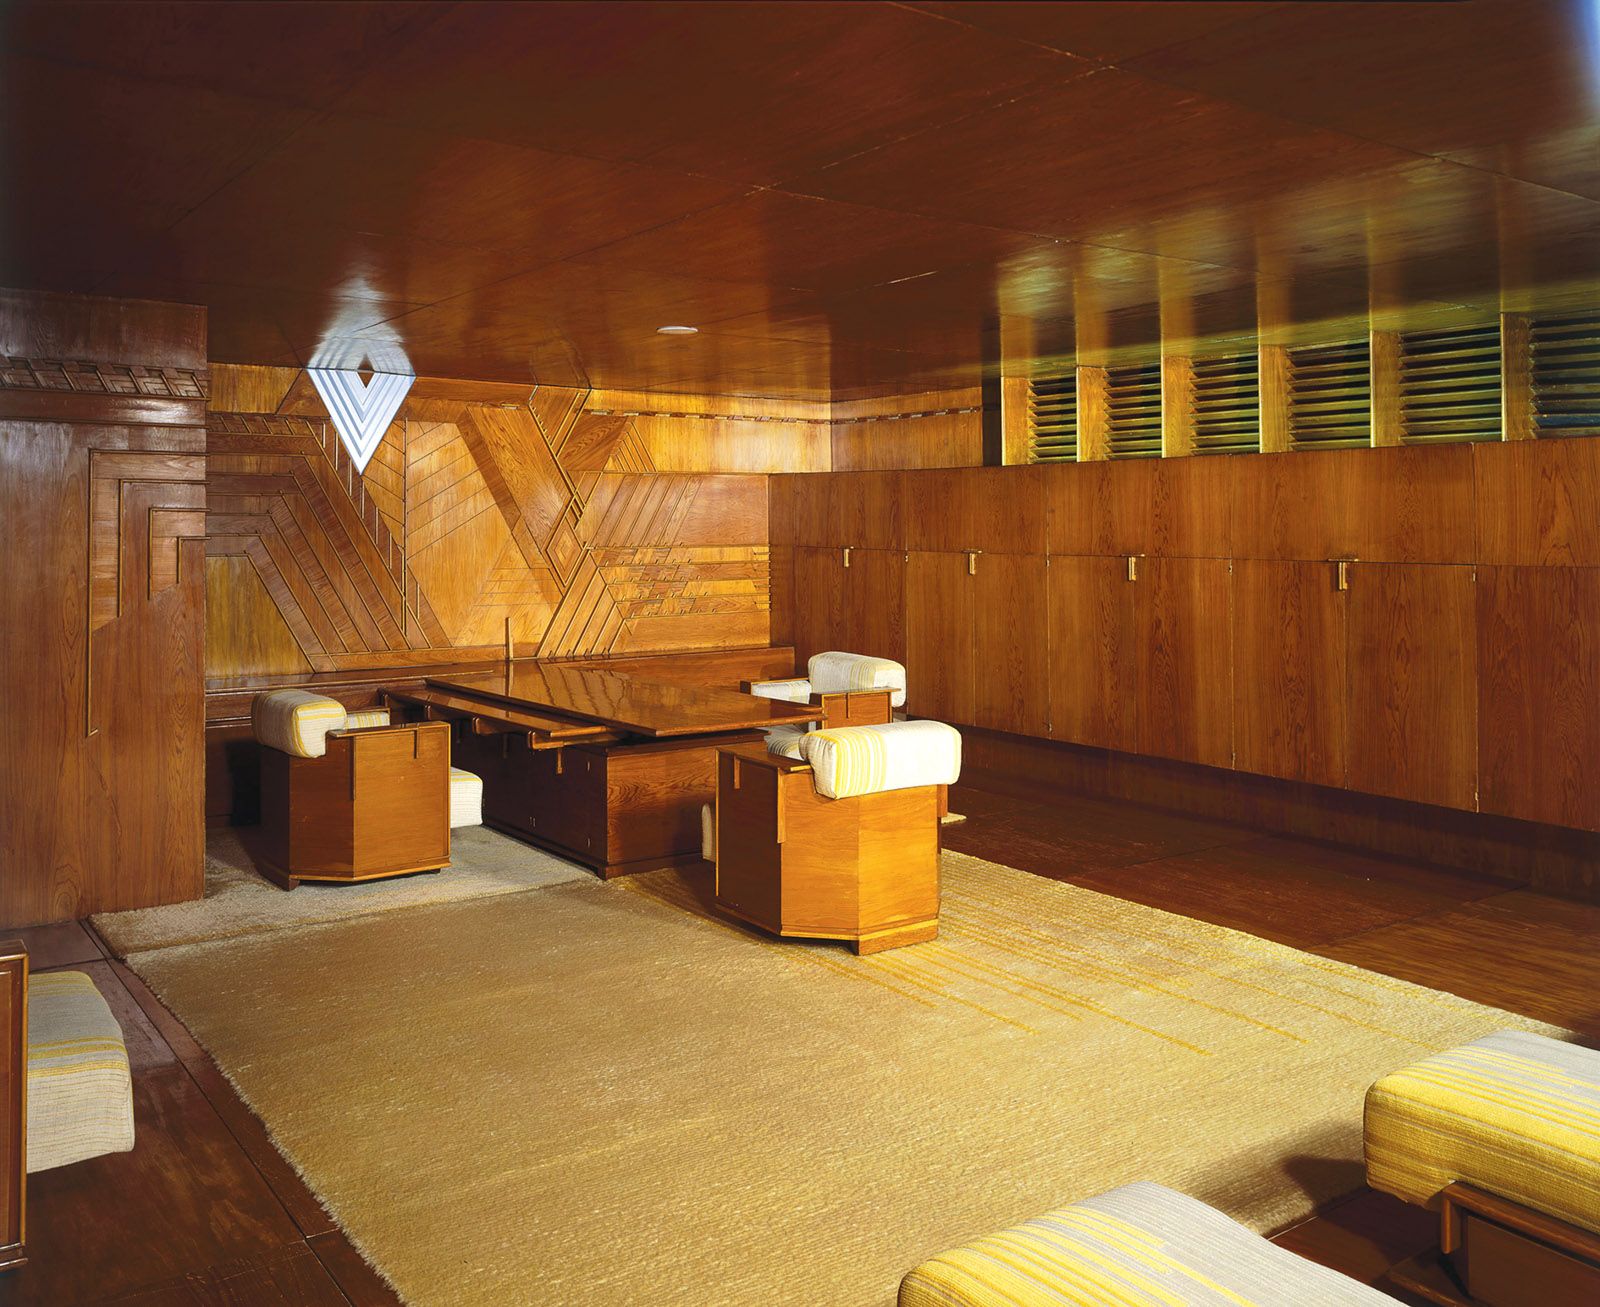 V&A's rare Frank Lloyd Wright interior is spruced up after years